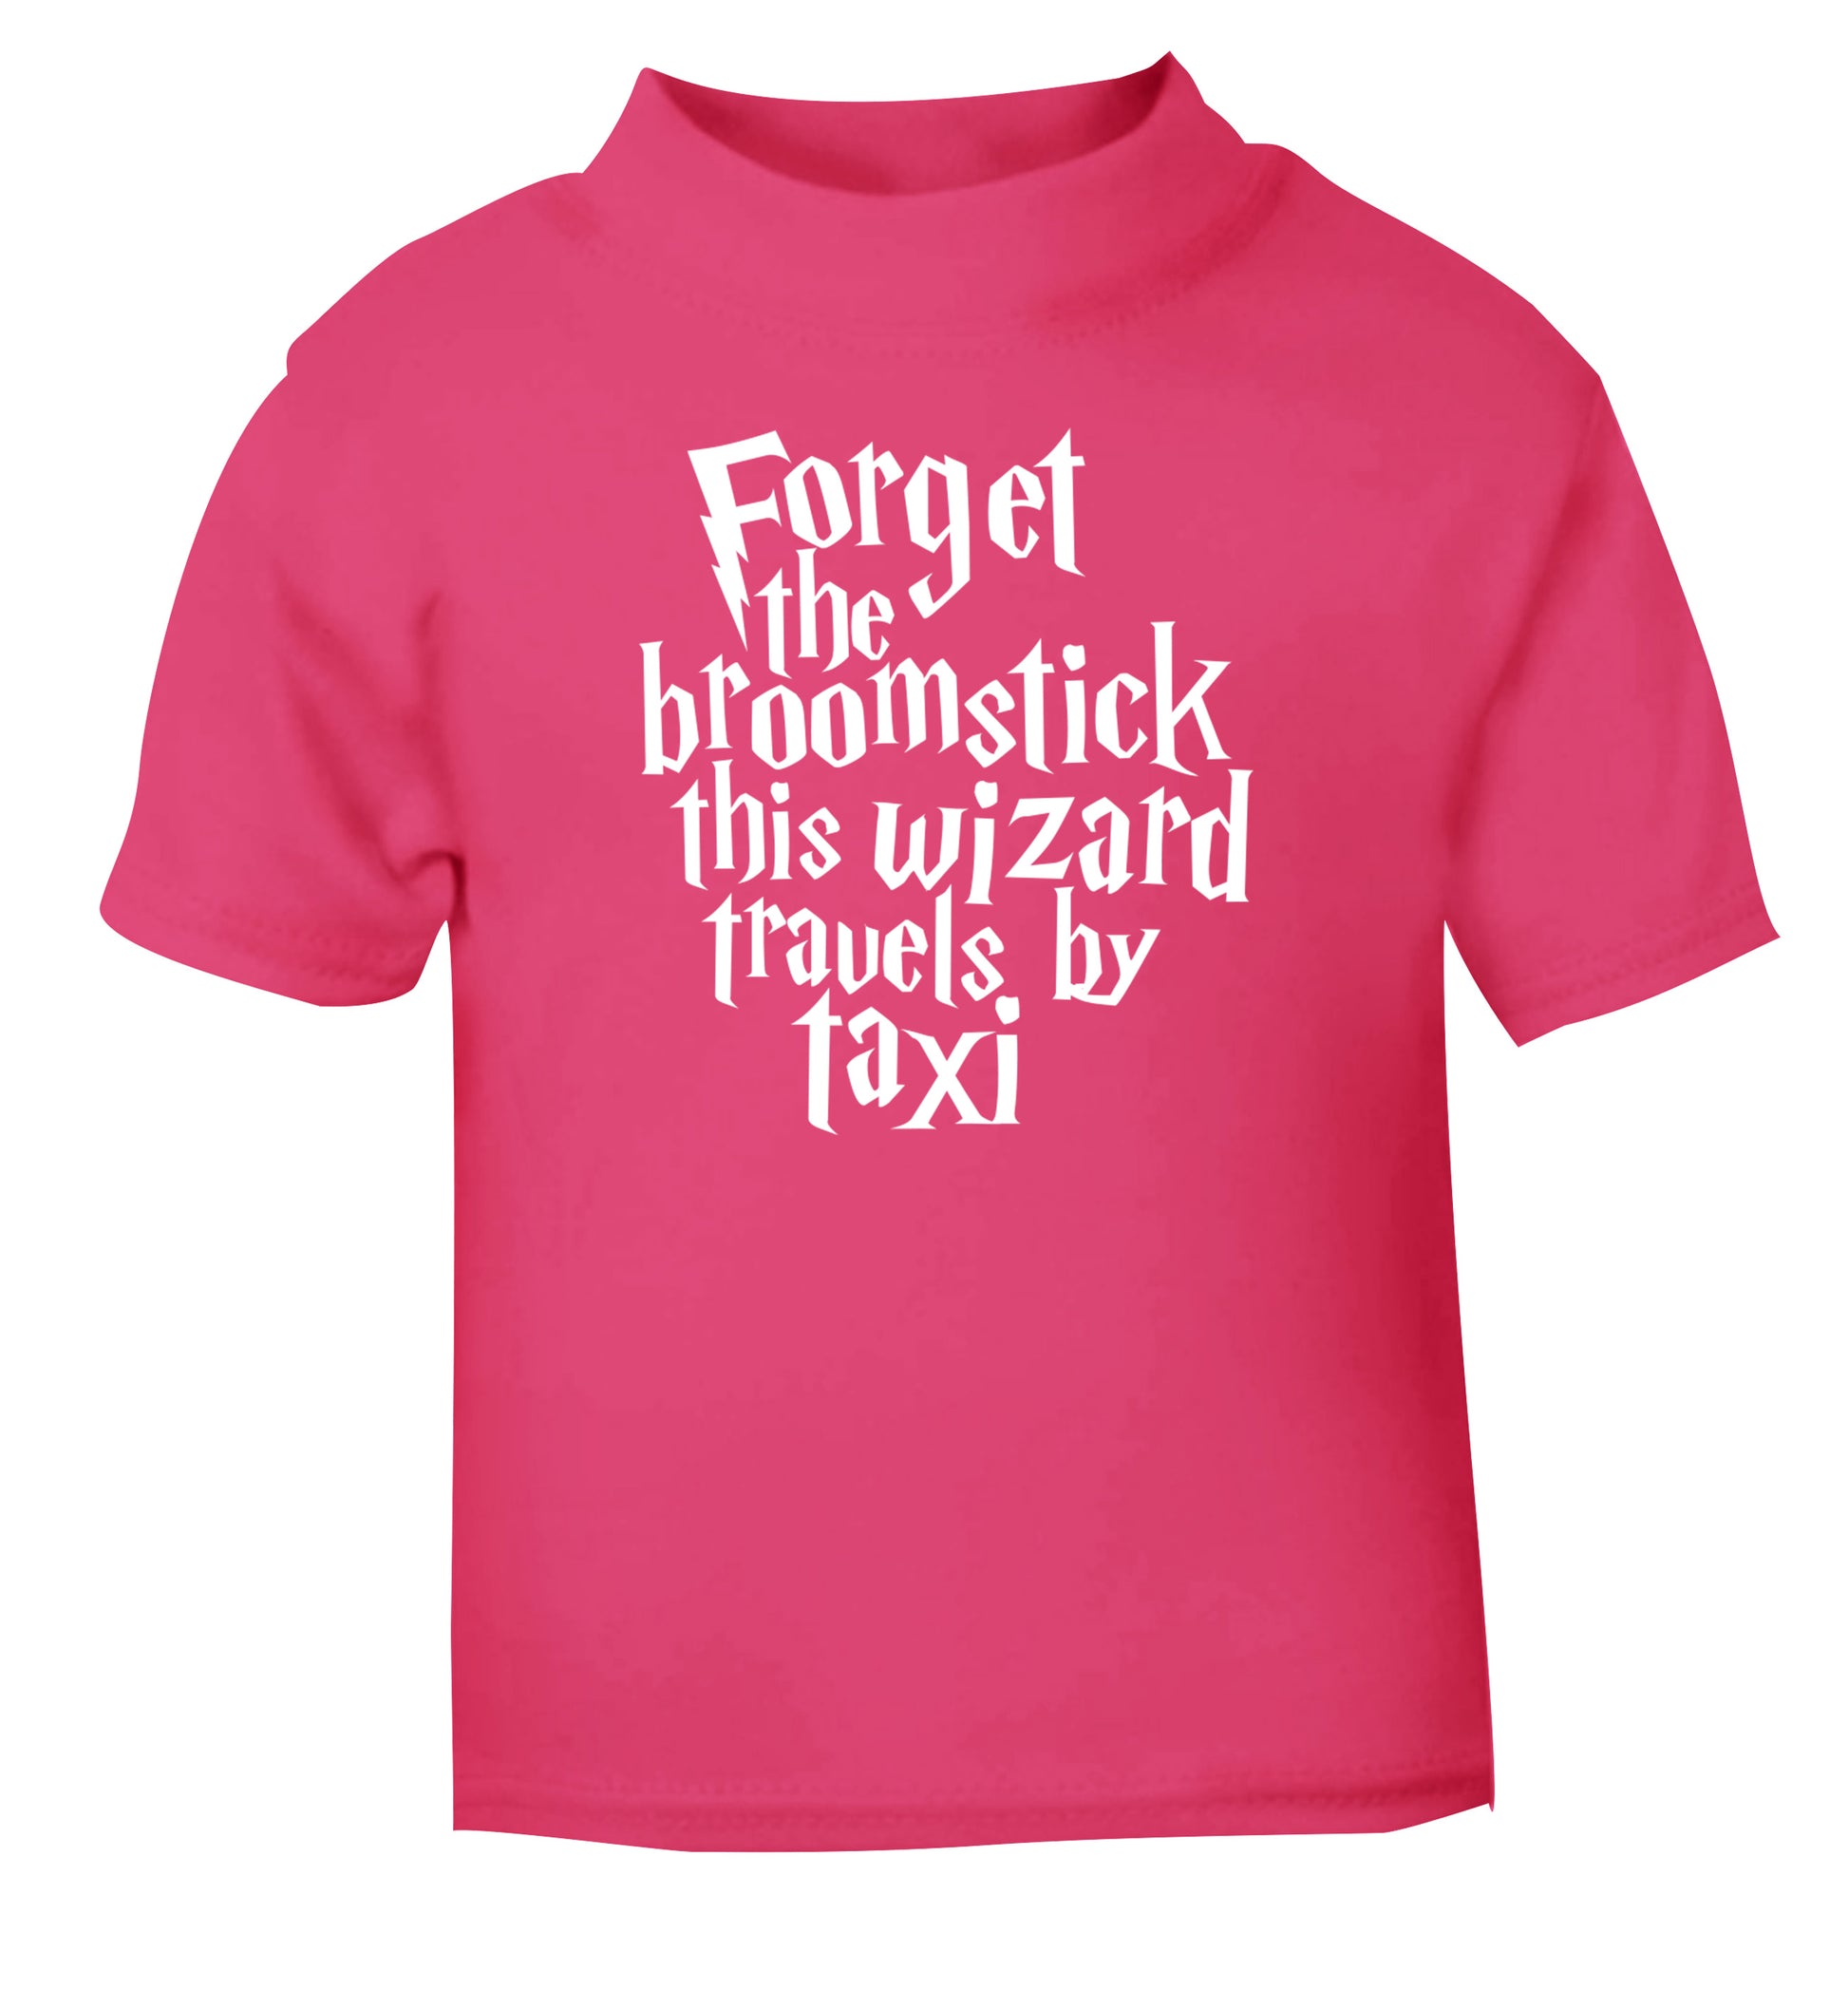 Forget the broomstick this wizard travels by taxi pink Baby Toddler Tshirt 2 Years